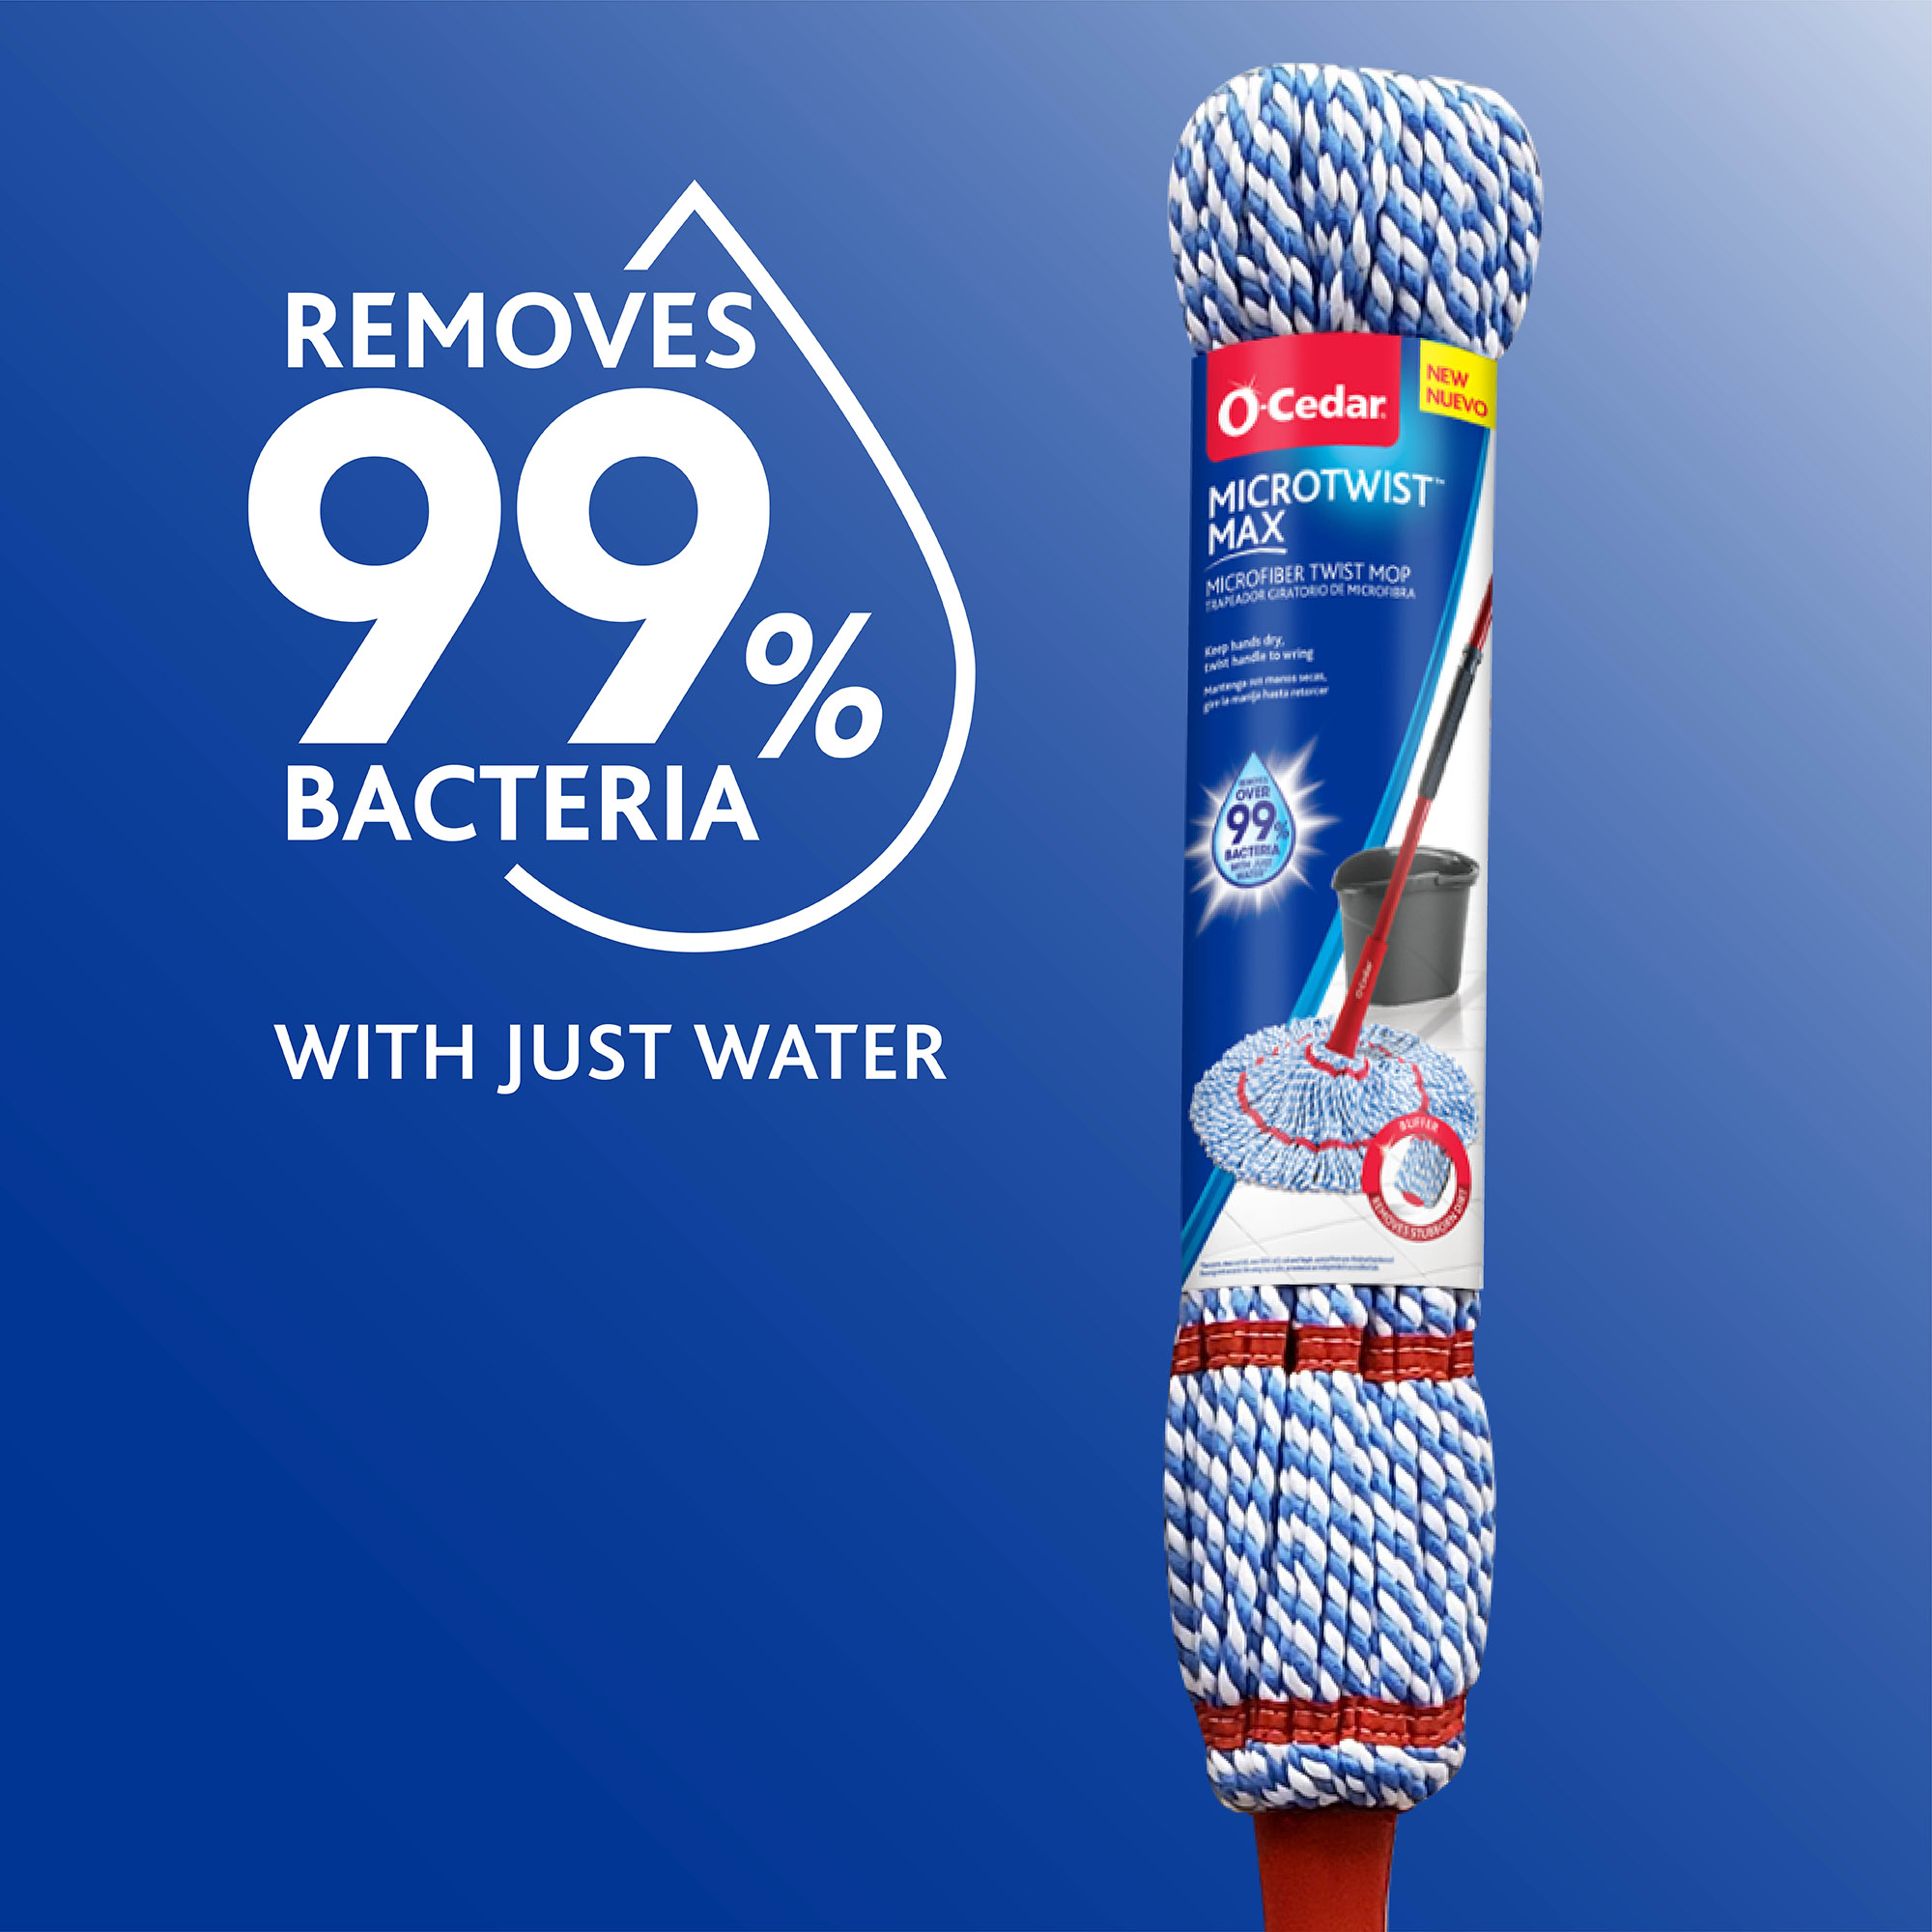 O-Cedar MicroTwist™ MAX Microfiber Mop, Removes 99% of Bacteria with Just Water - image 4 of 18